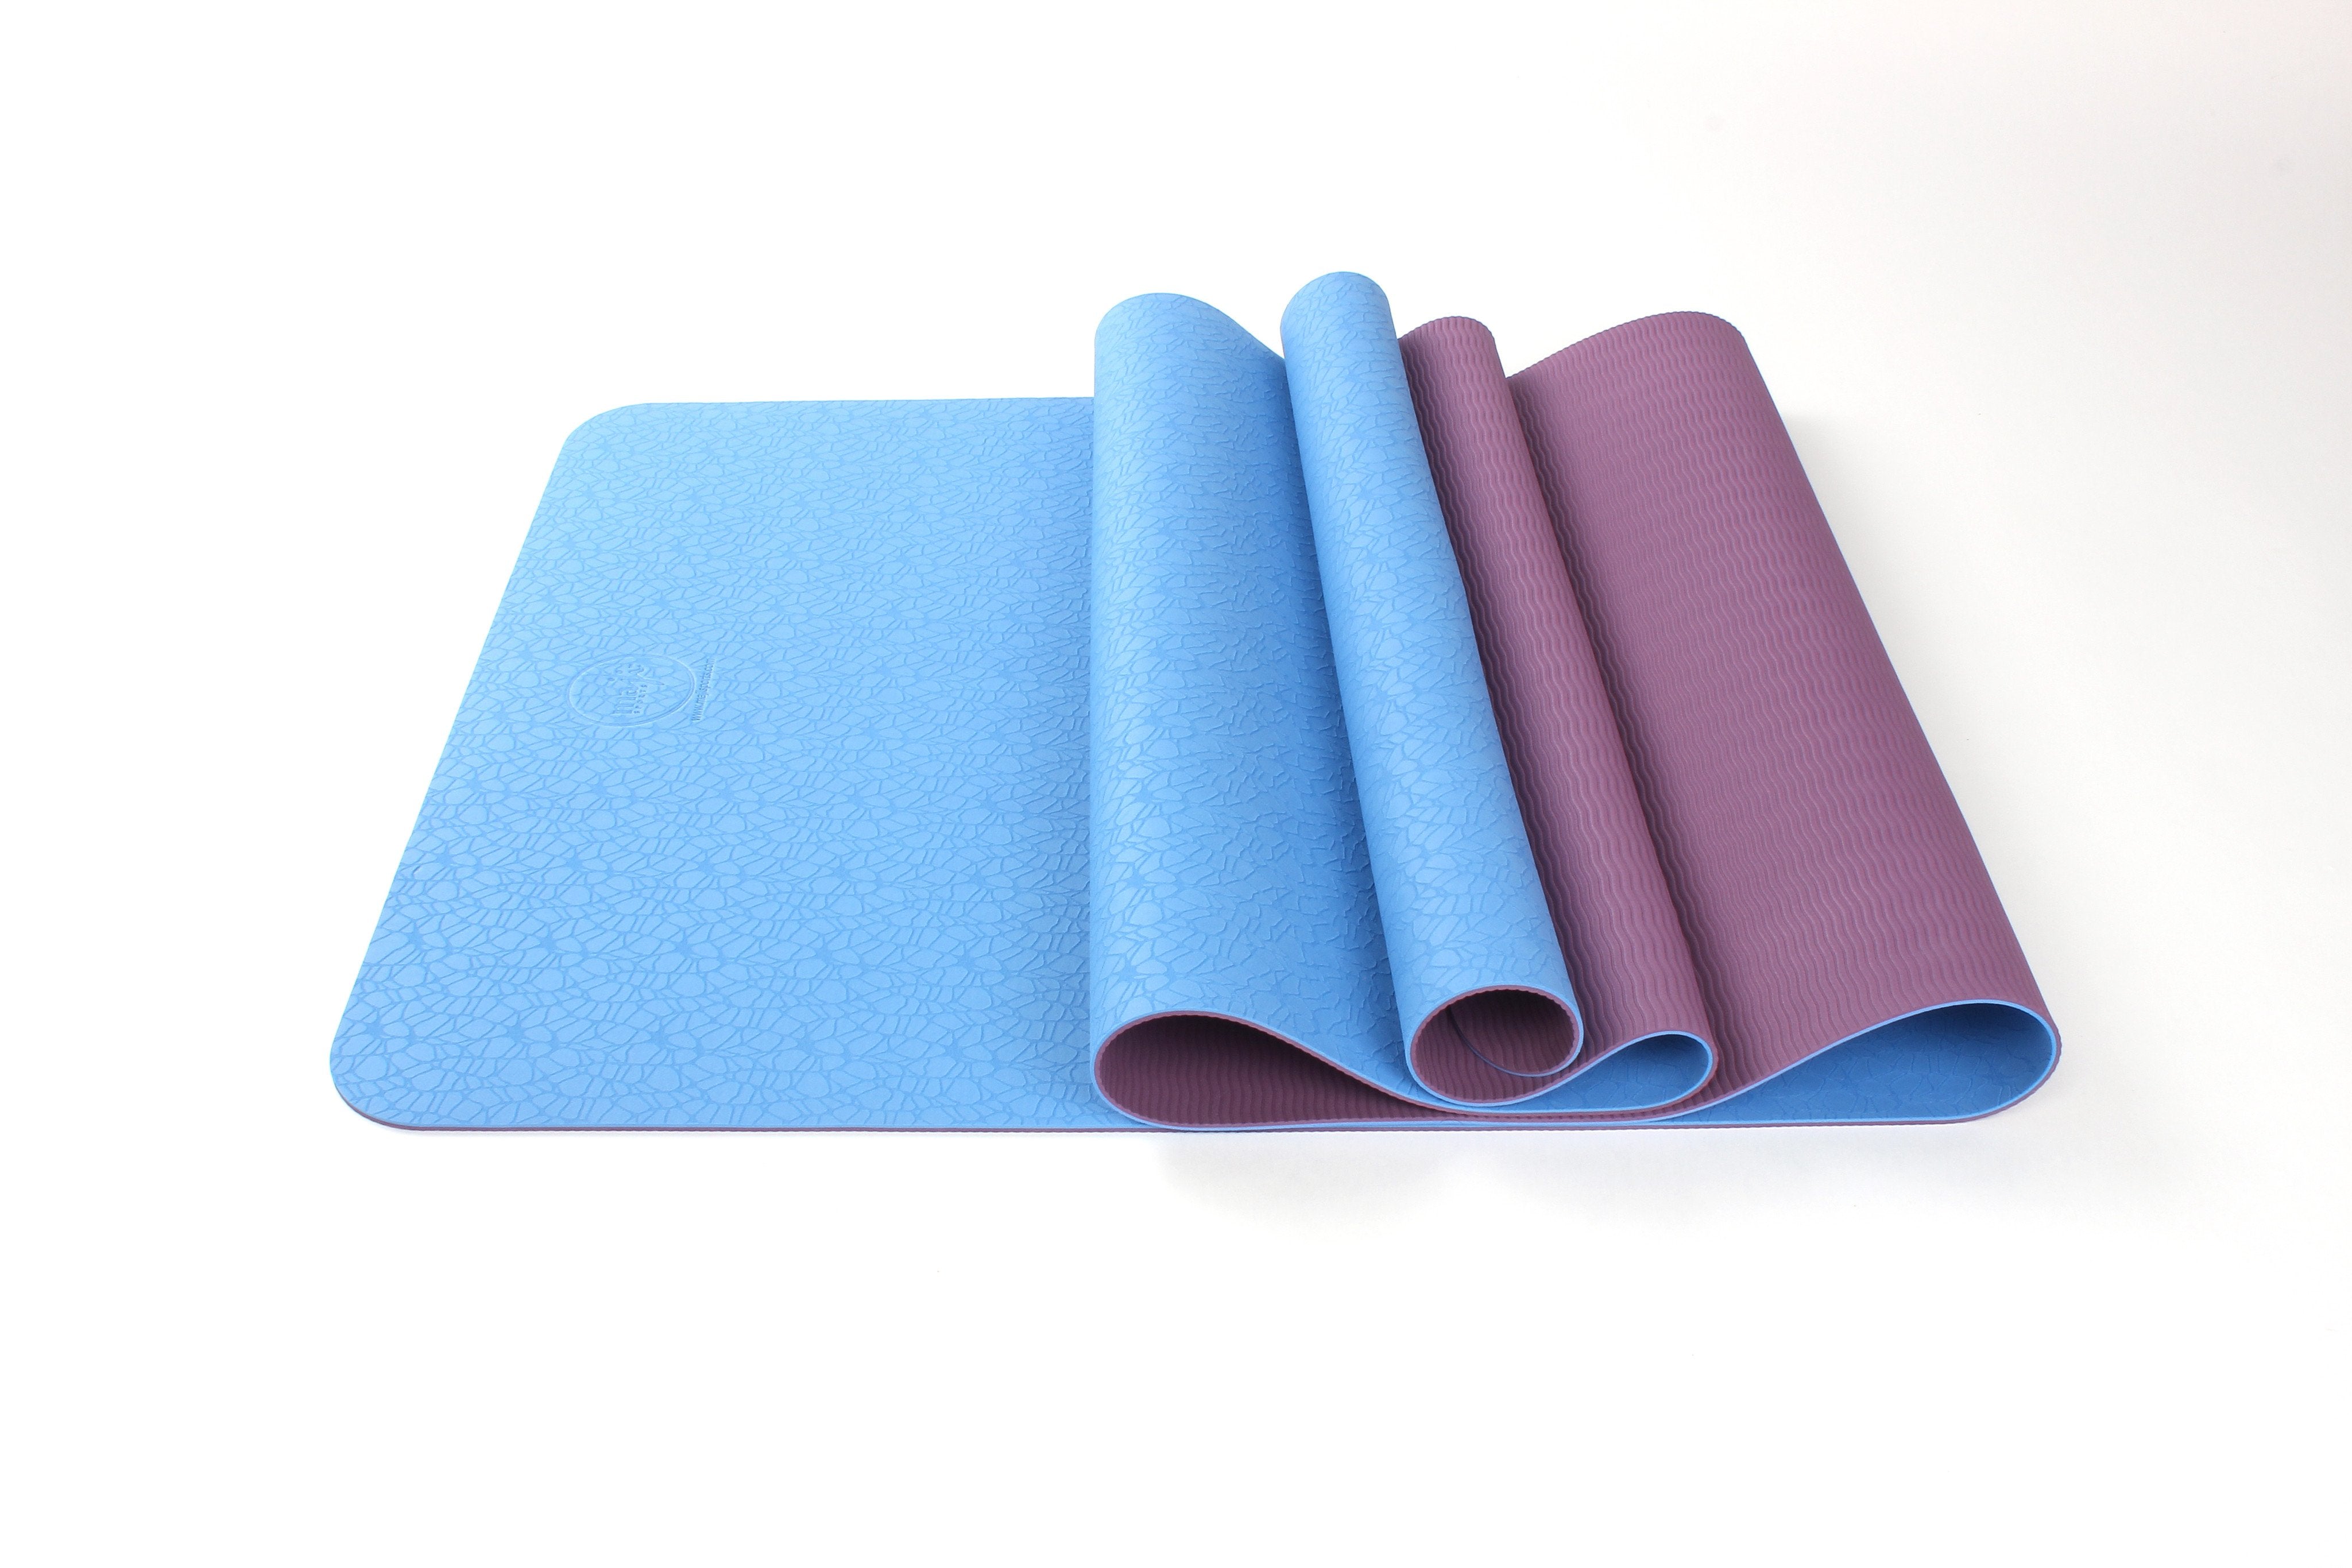 Two-tone TPE Yoga Mat the best yoga mat you need